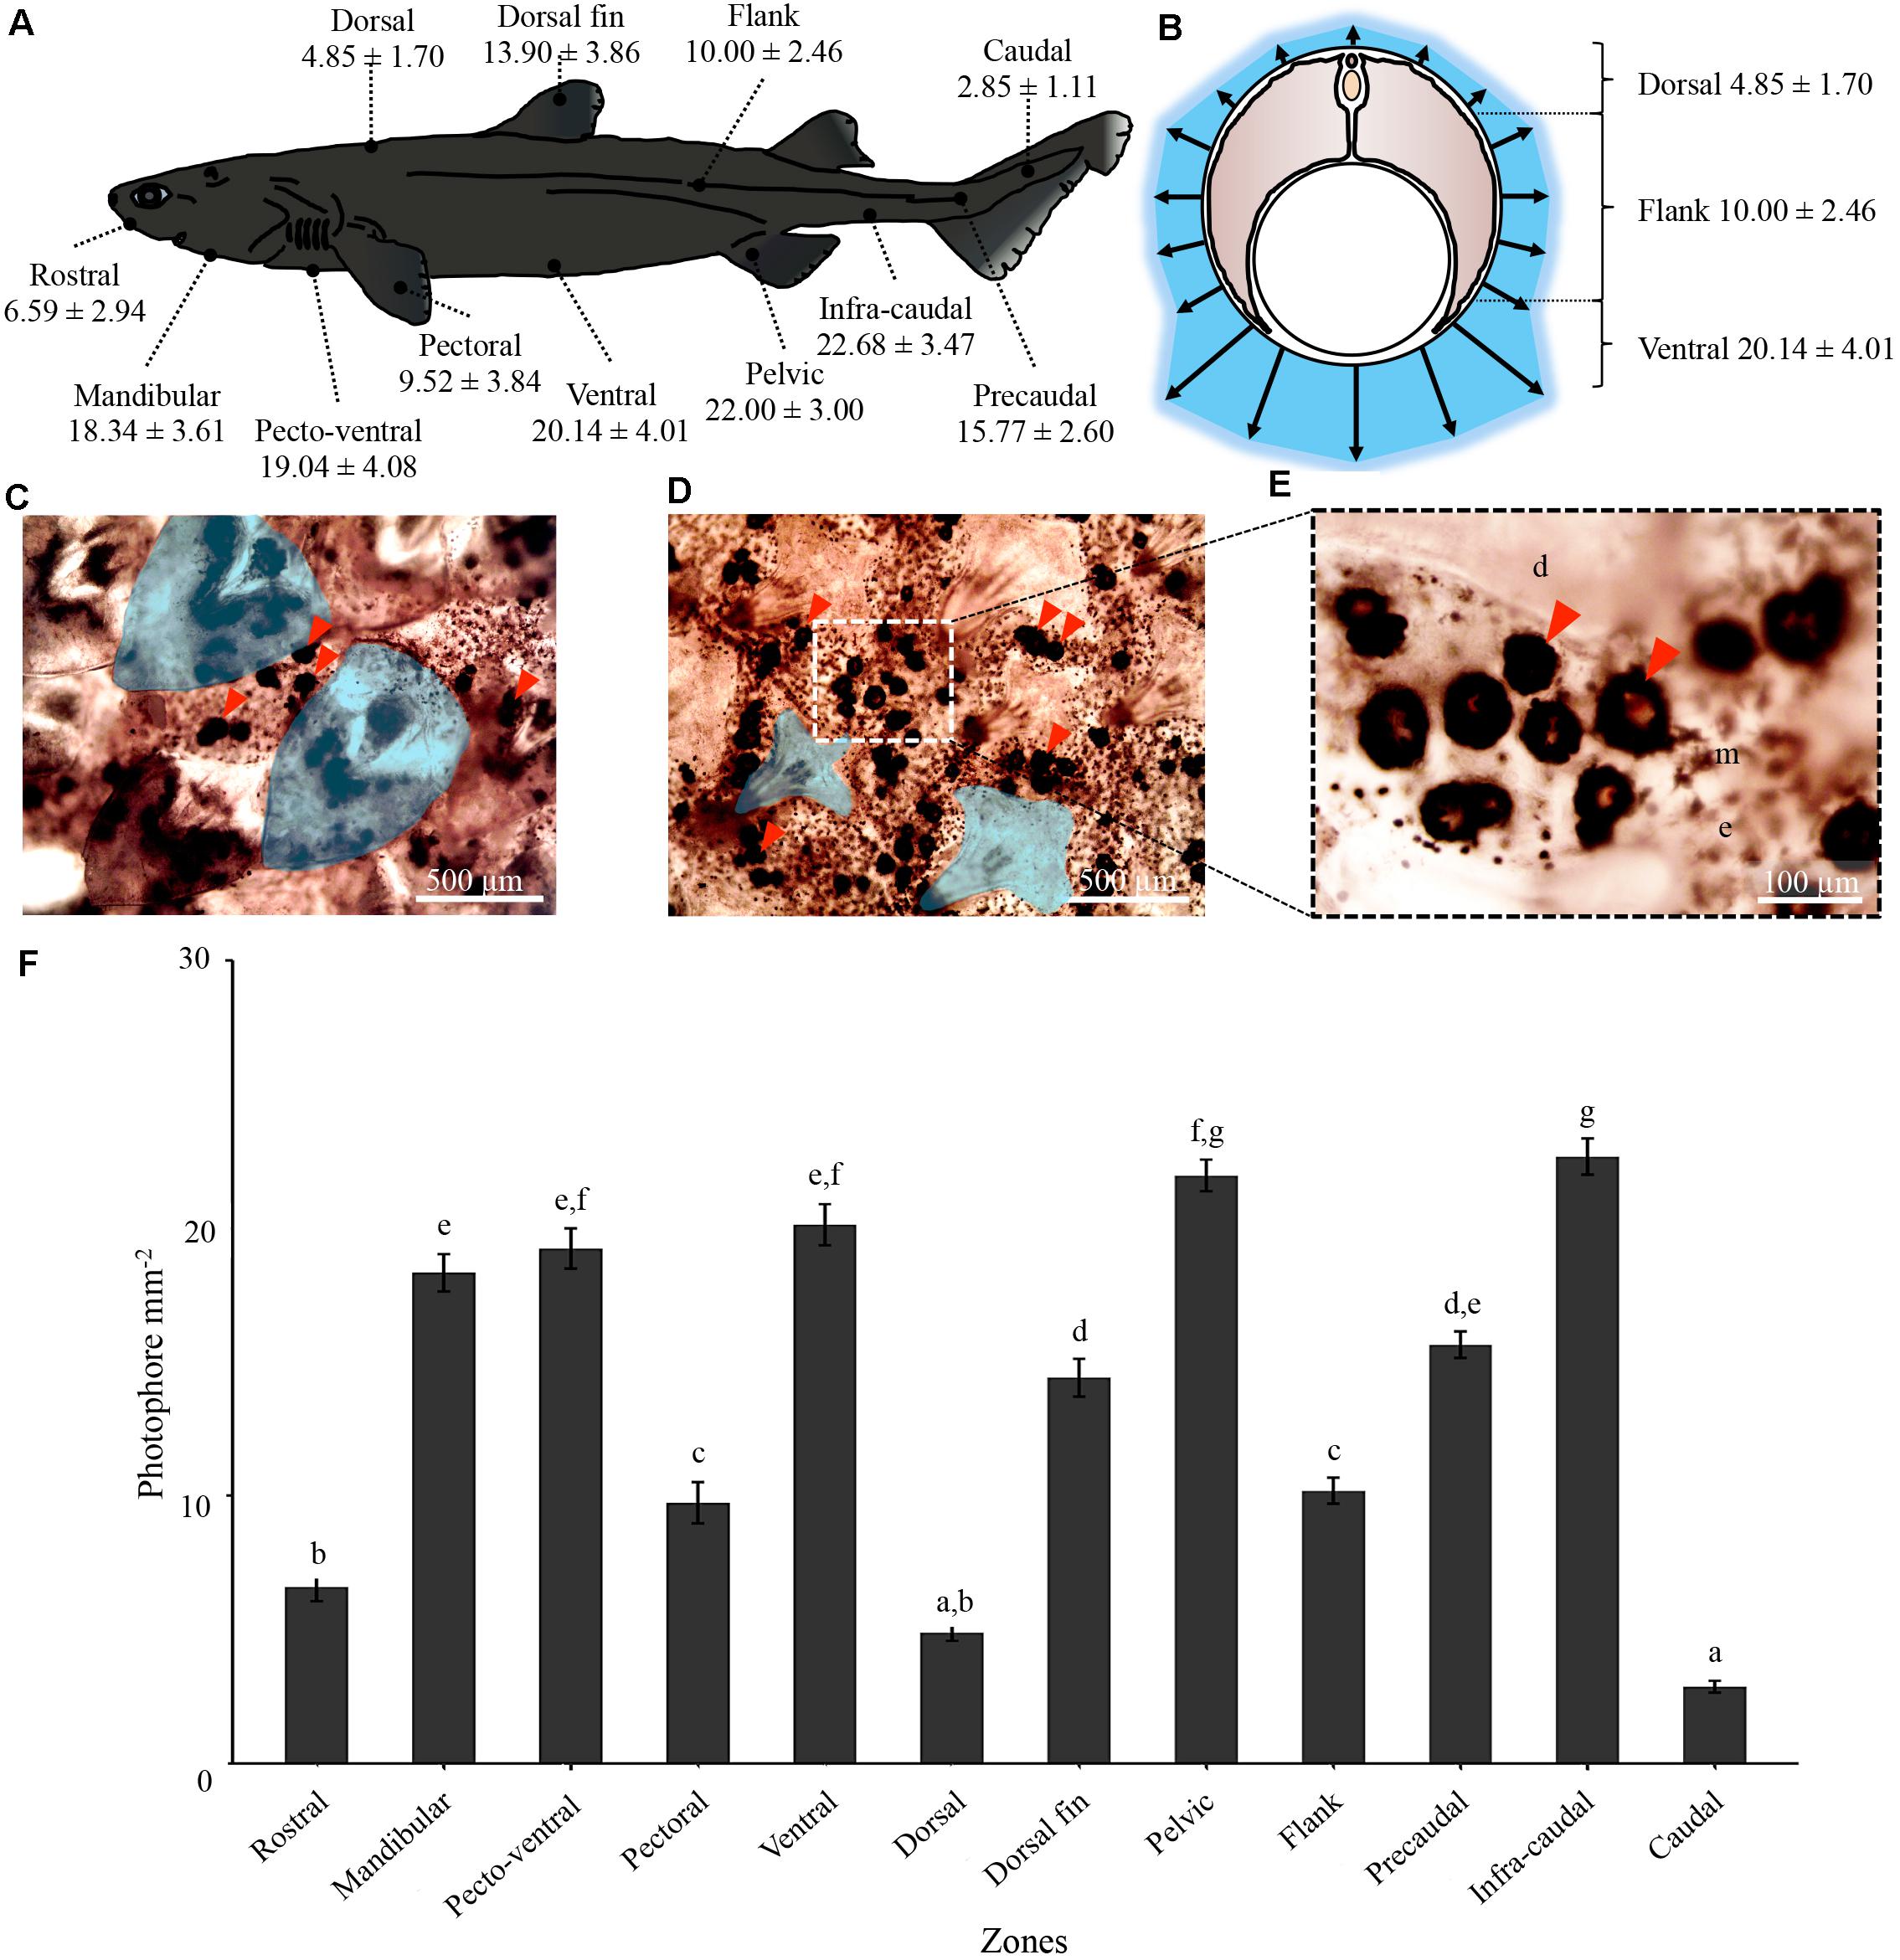 This Deep-Sea Fish Has the Most Types of Opsins Among Vertebrates